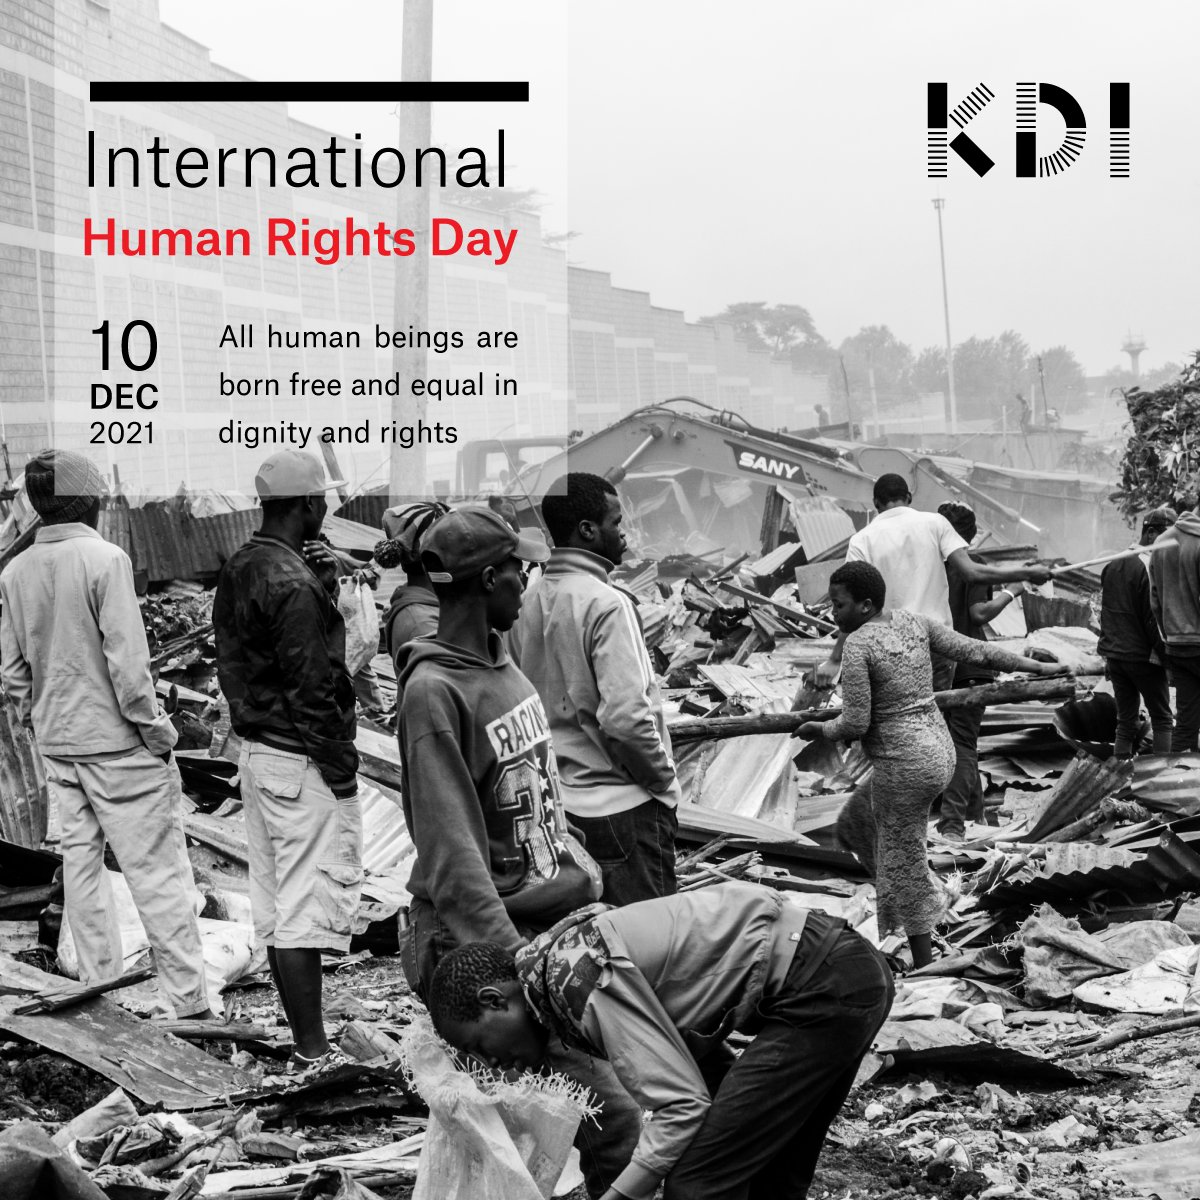 Widespread poverty, inequalities & structural discrimination are human rights violations. To tackle them successfully, we need actions grounded in human rights, political commitment & participation, especially those most affected. #EndForcedEvictions #InternationalHumanRightsDay